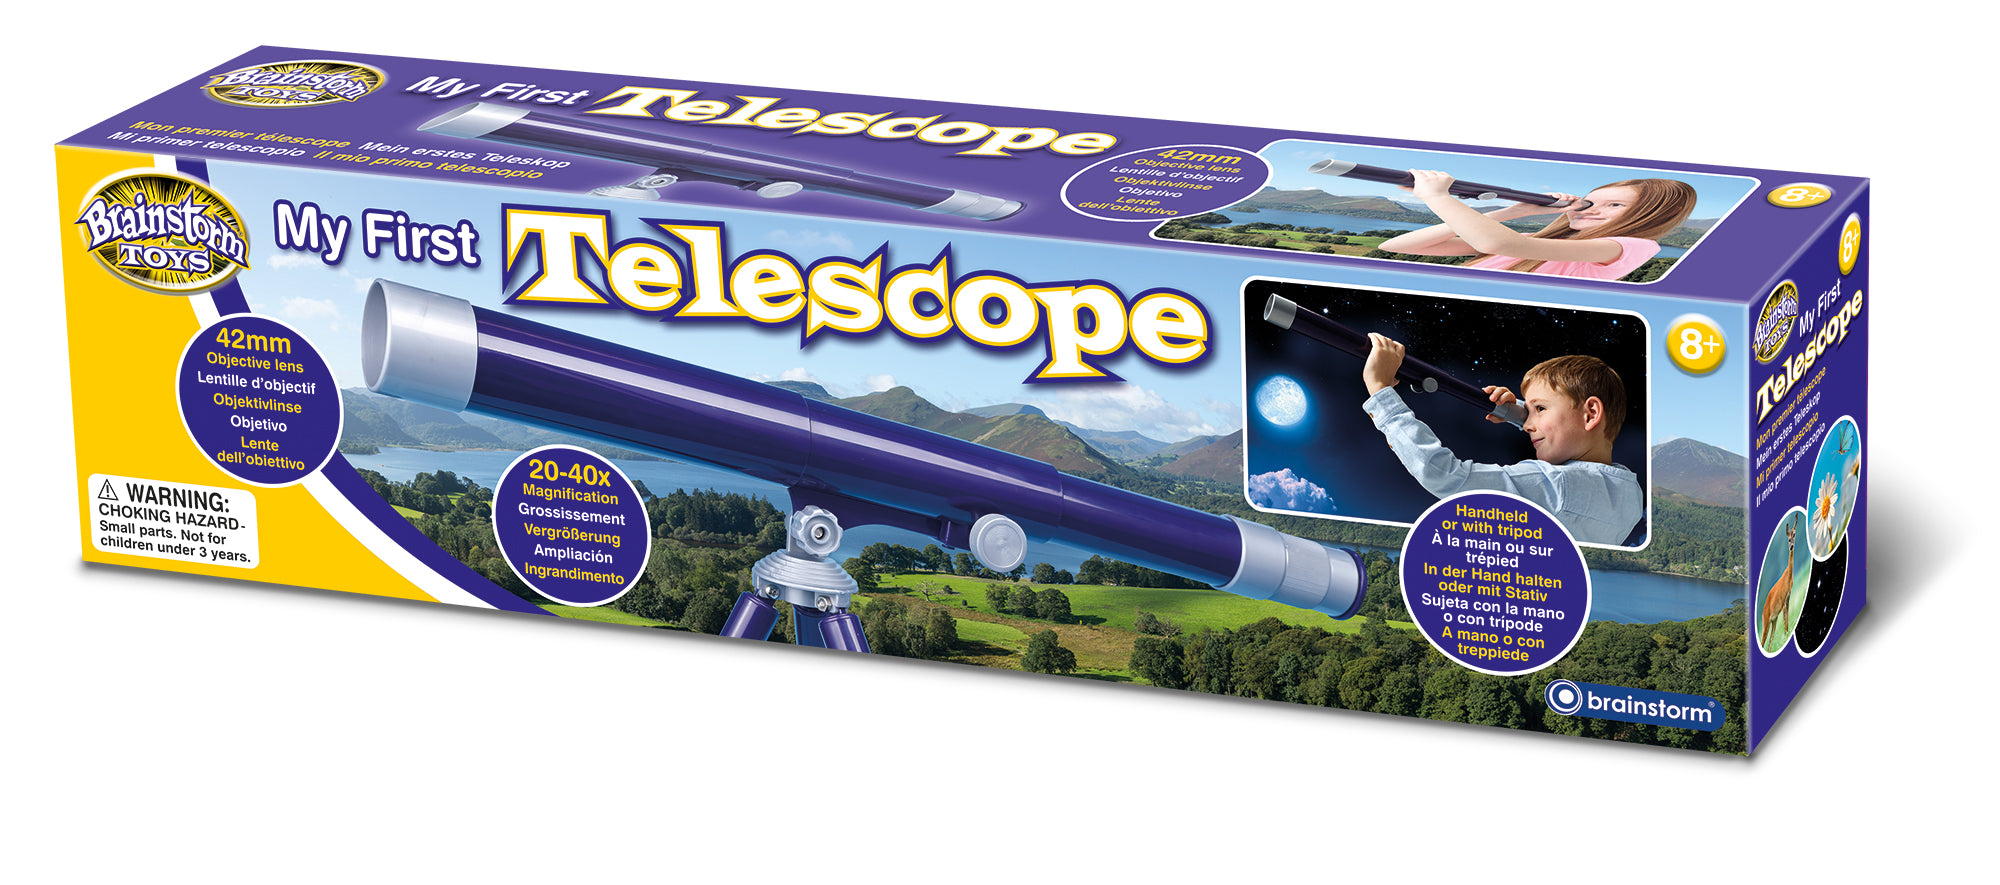 My First Telescope by Brainstorm Toys